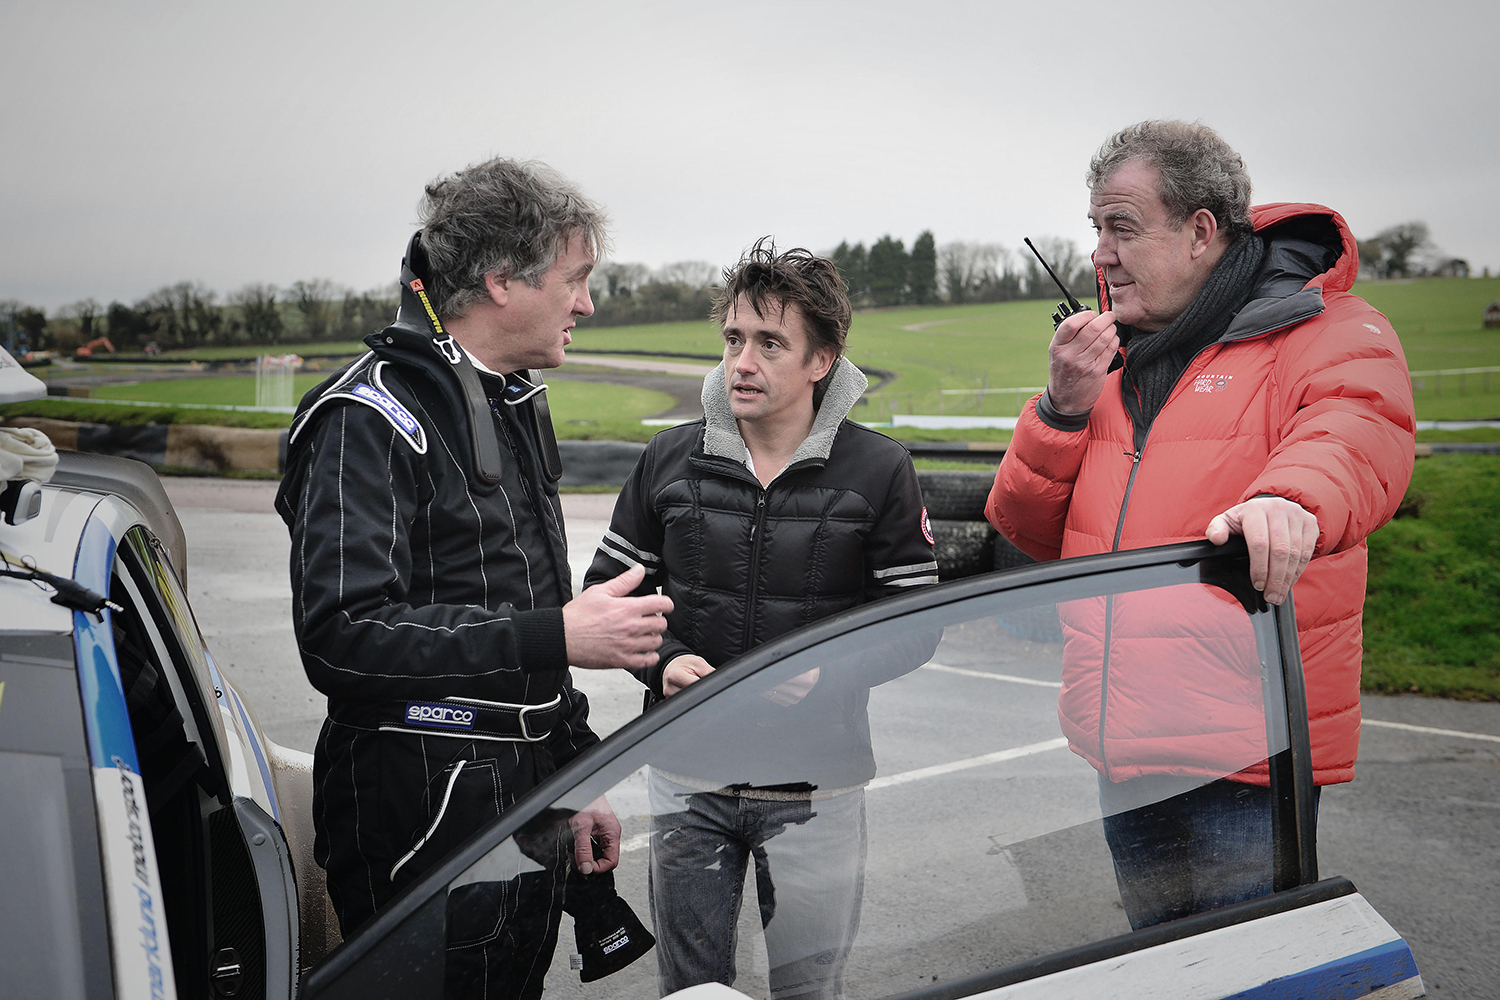 Best Top Gear Episodes of All Time